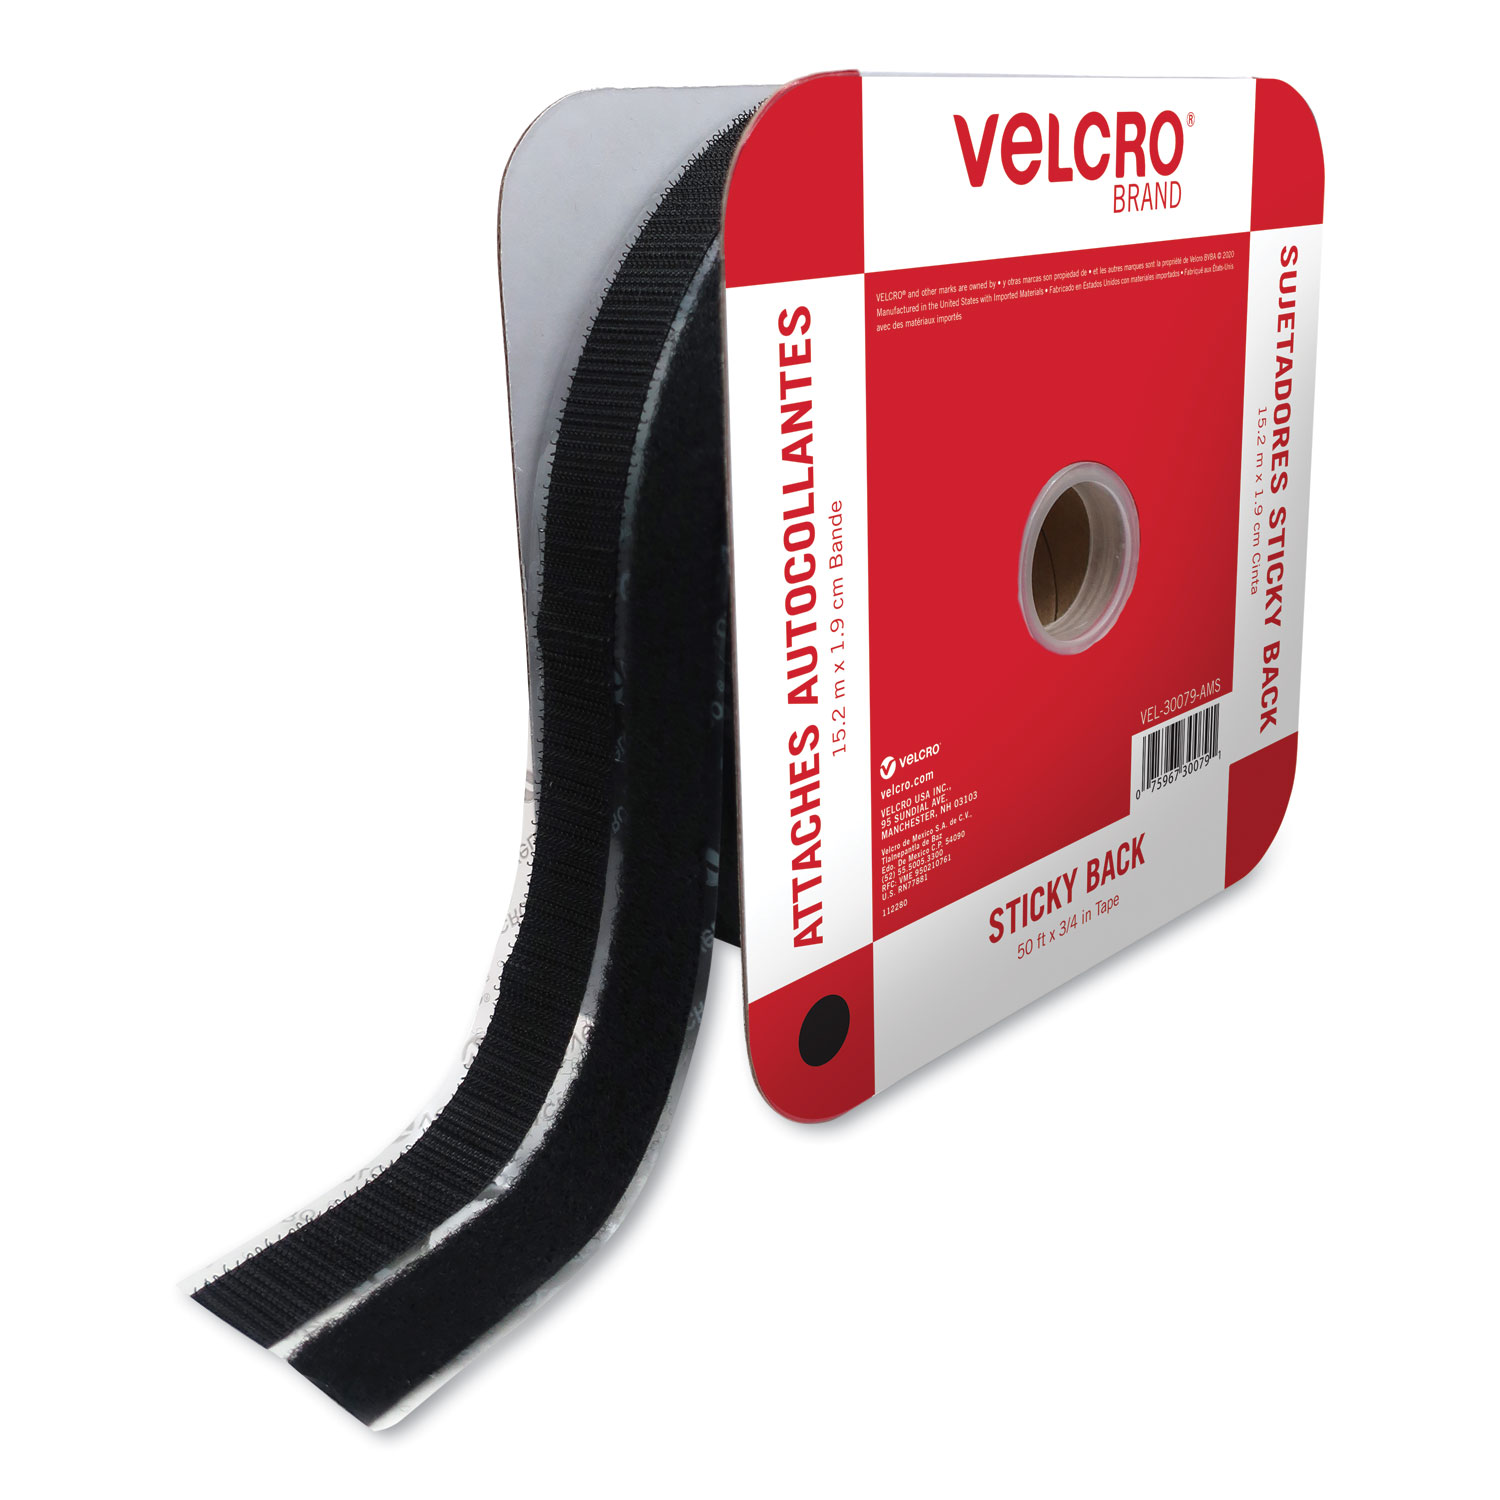 Velcro® Brand Sticky Back General Purpose Stick On, 1 ct - Foods Co.